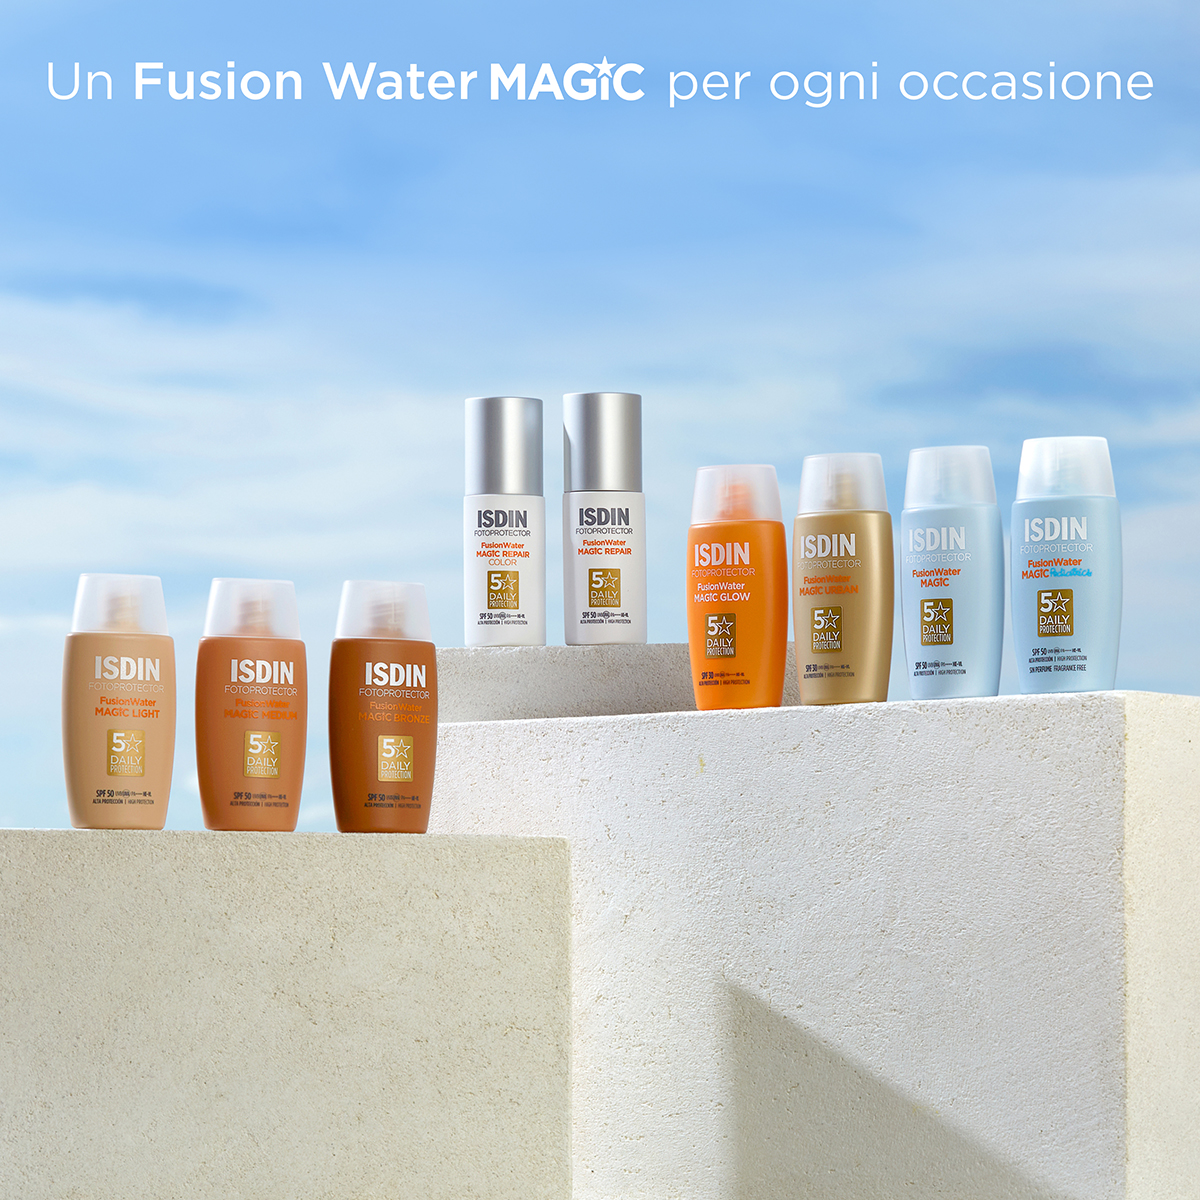 Fusion Water 